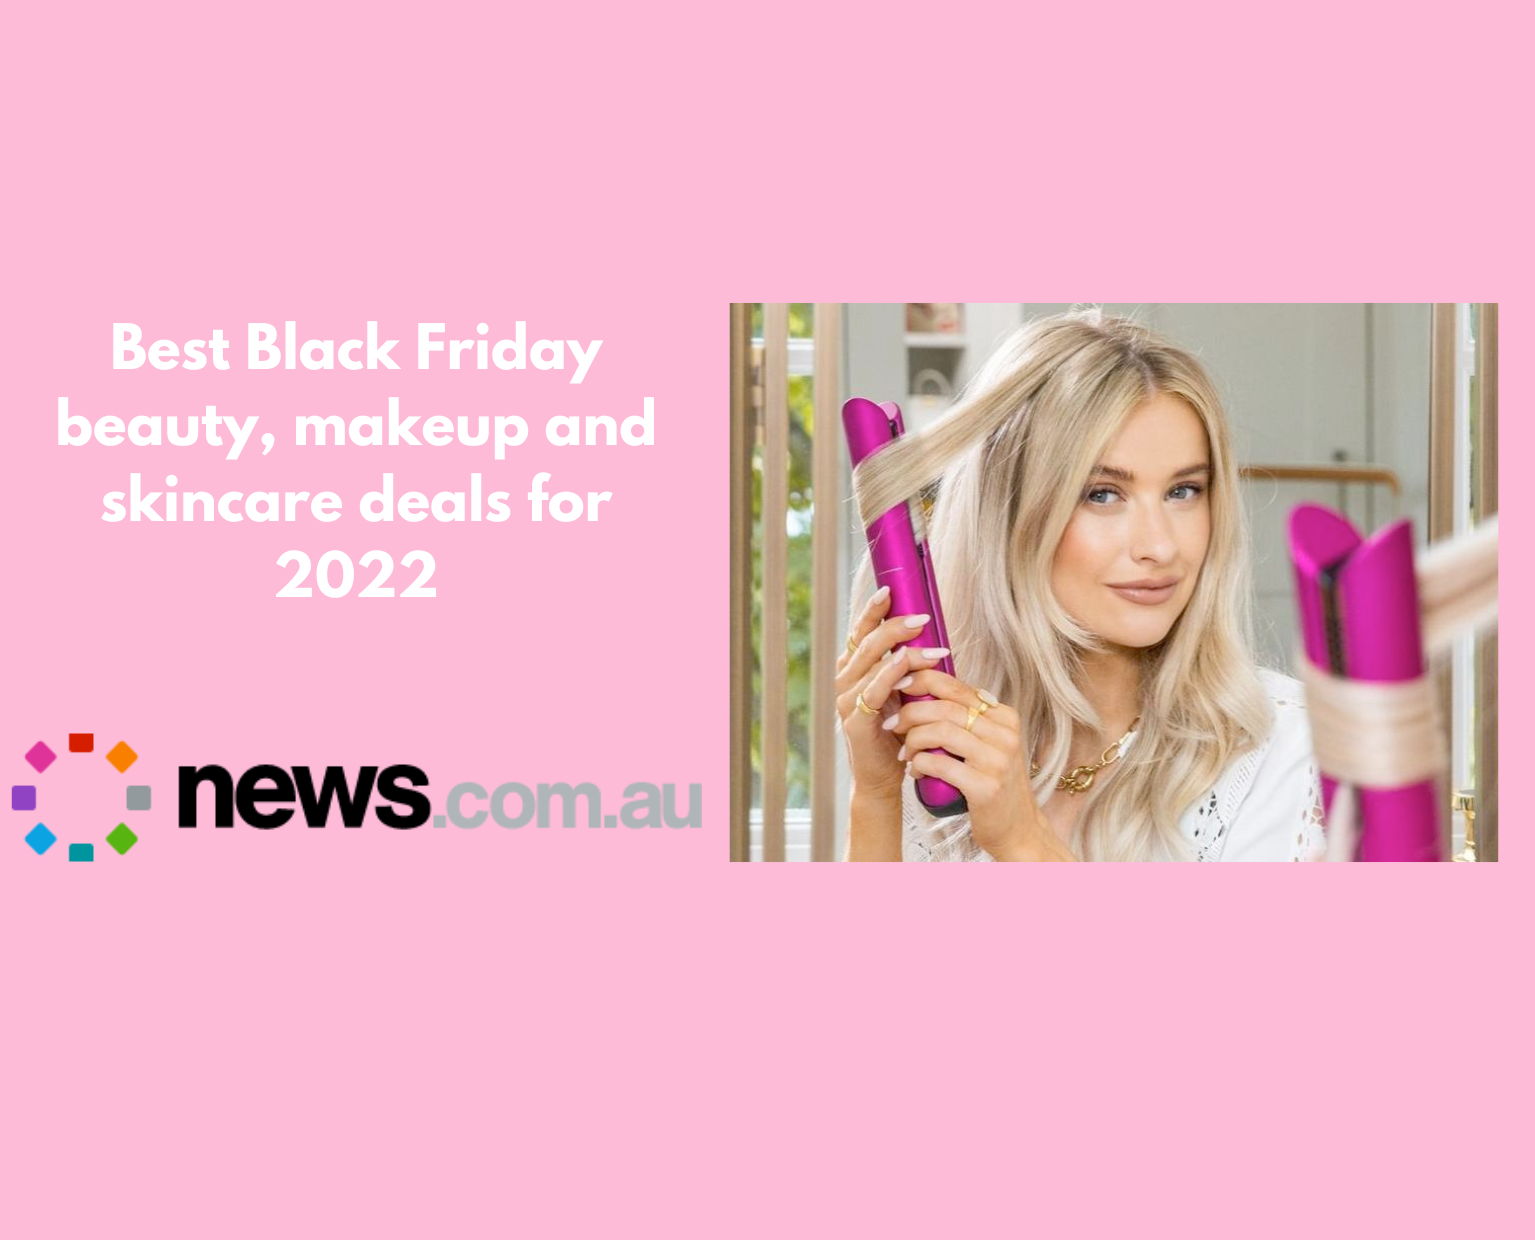 Best Black Friday beauty, makeup and skincare deals for 2022